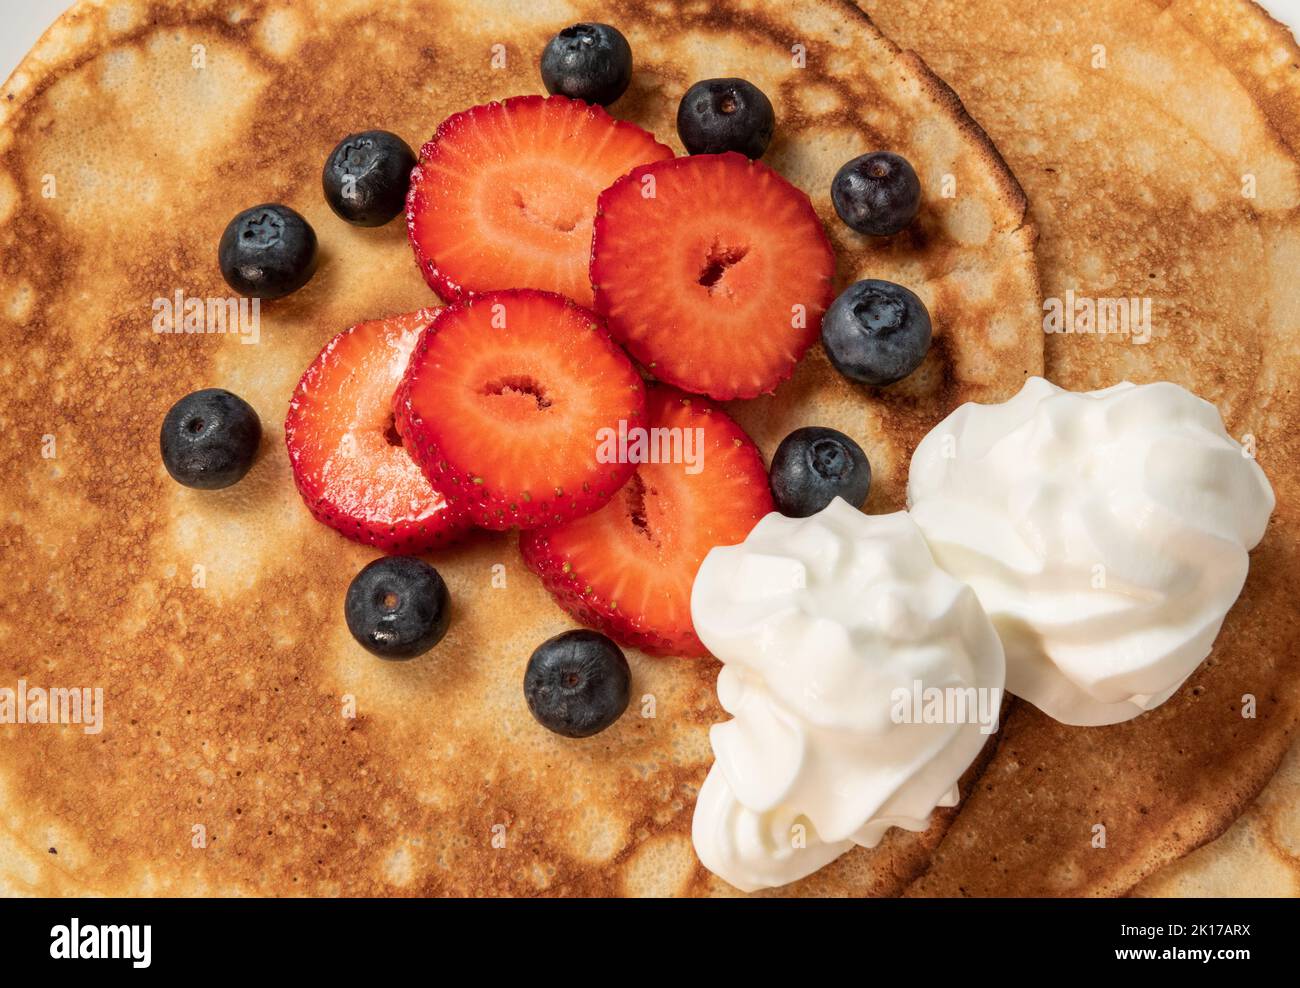 Pancakes with strawberries, blueberries and cream close up Stock Photo